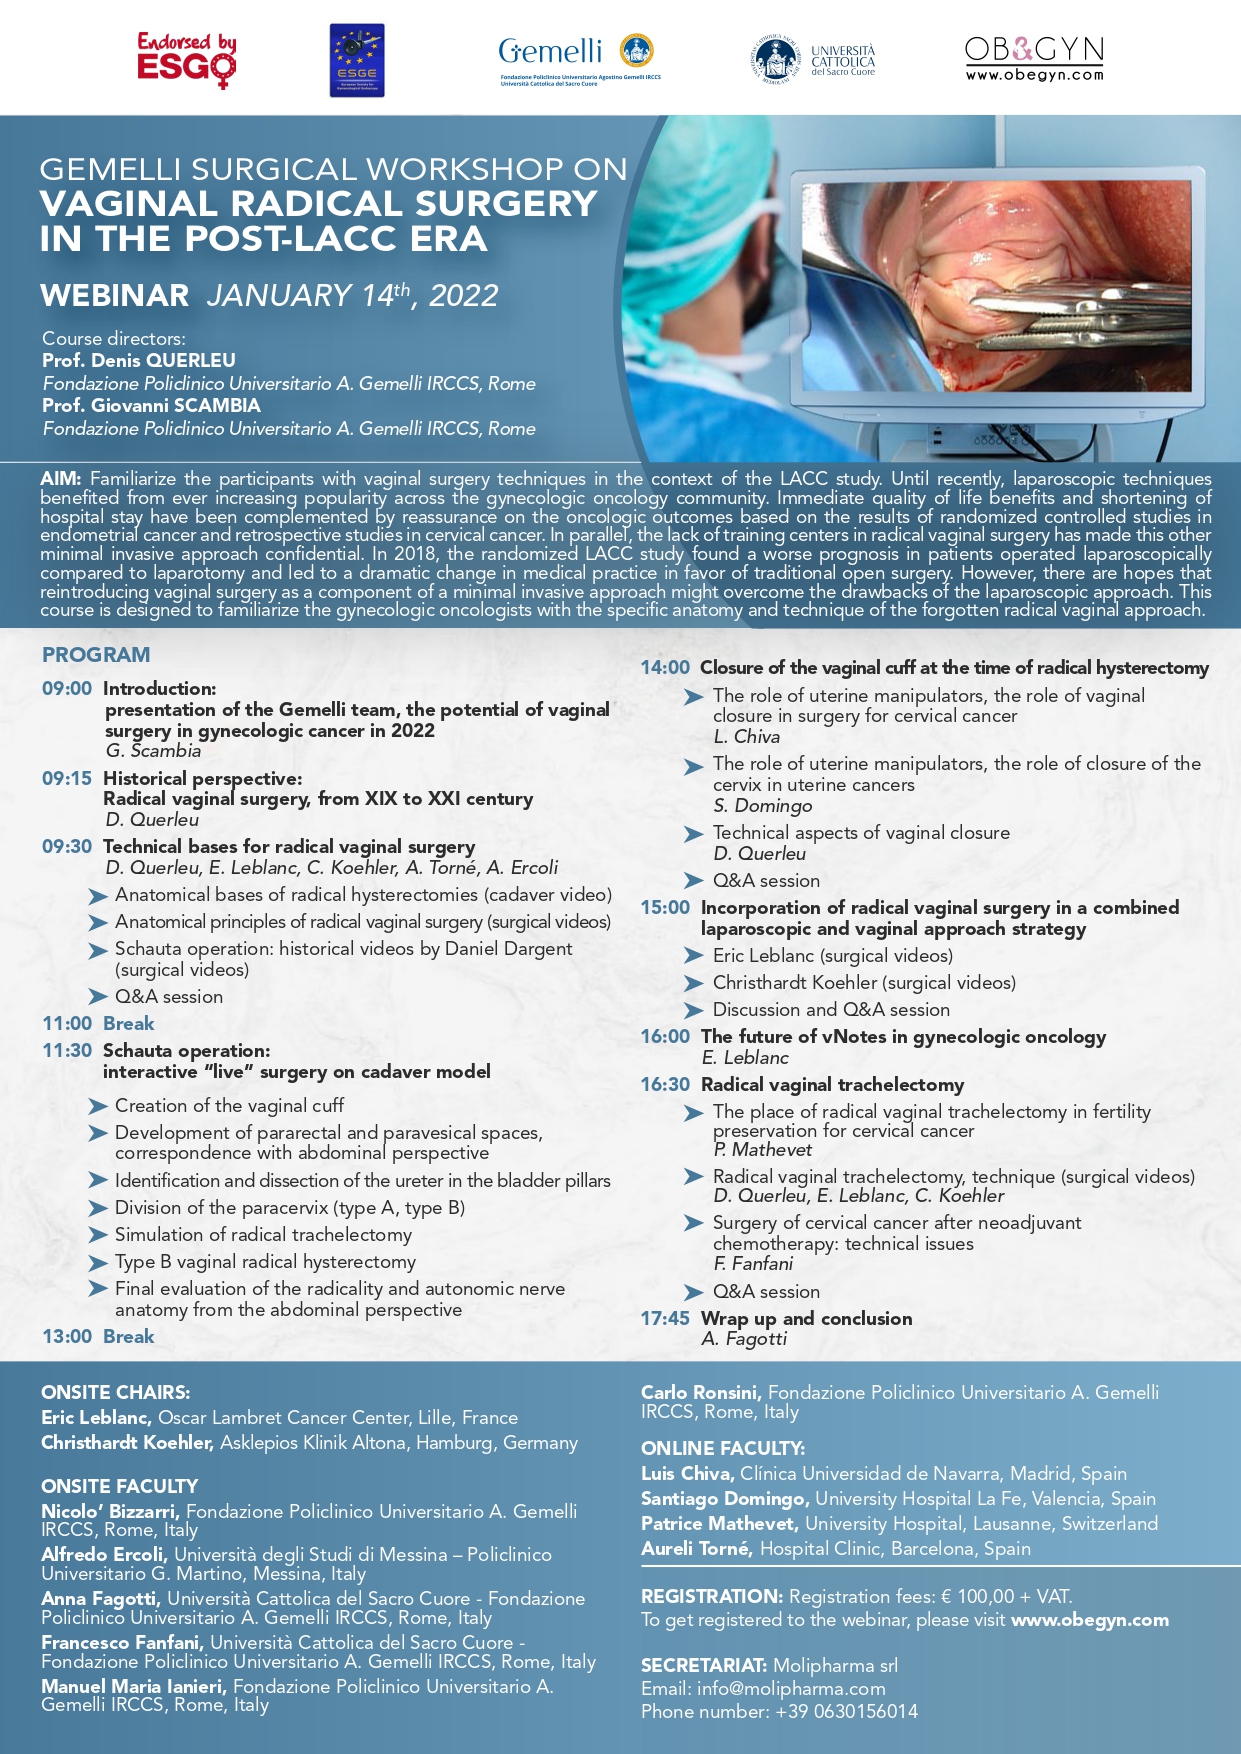 Programma VIRTUAL COURSE - GEMELLI SURGICAL WORKSHOP ON VAGINAL RADICAL SURGERY IN THE POST-LACC ERA